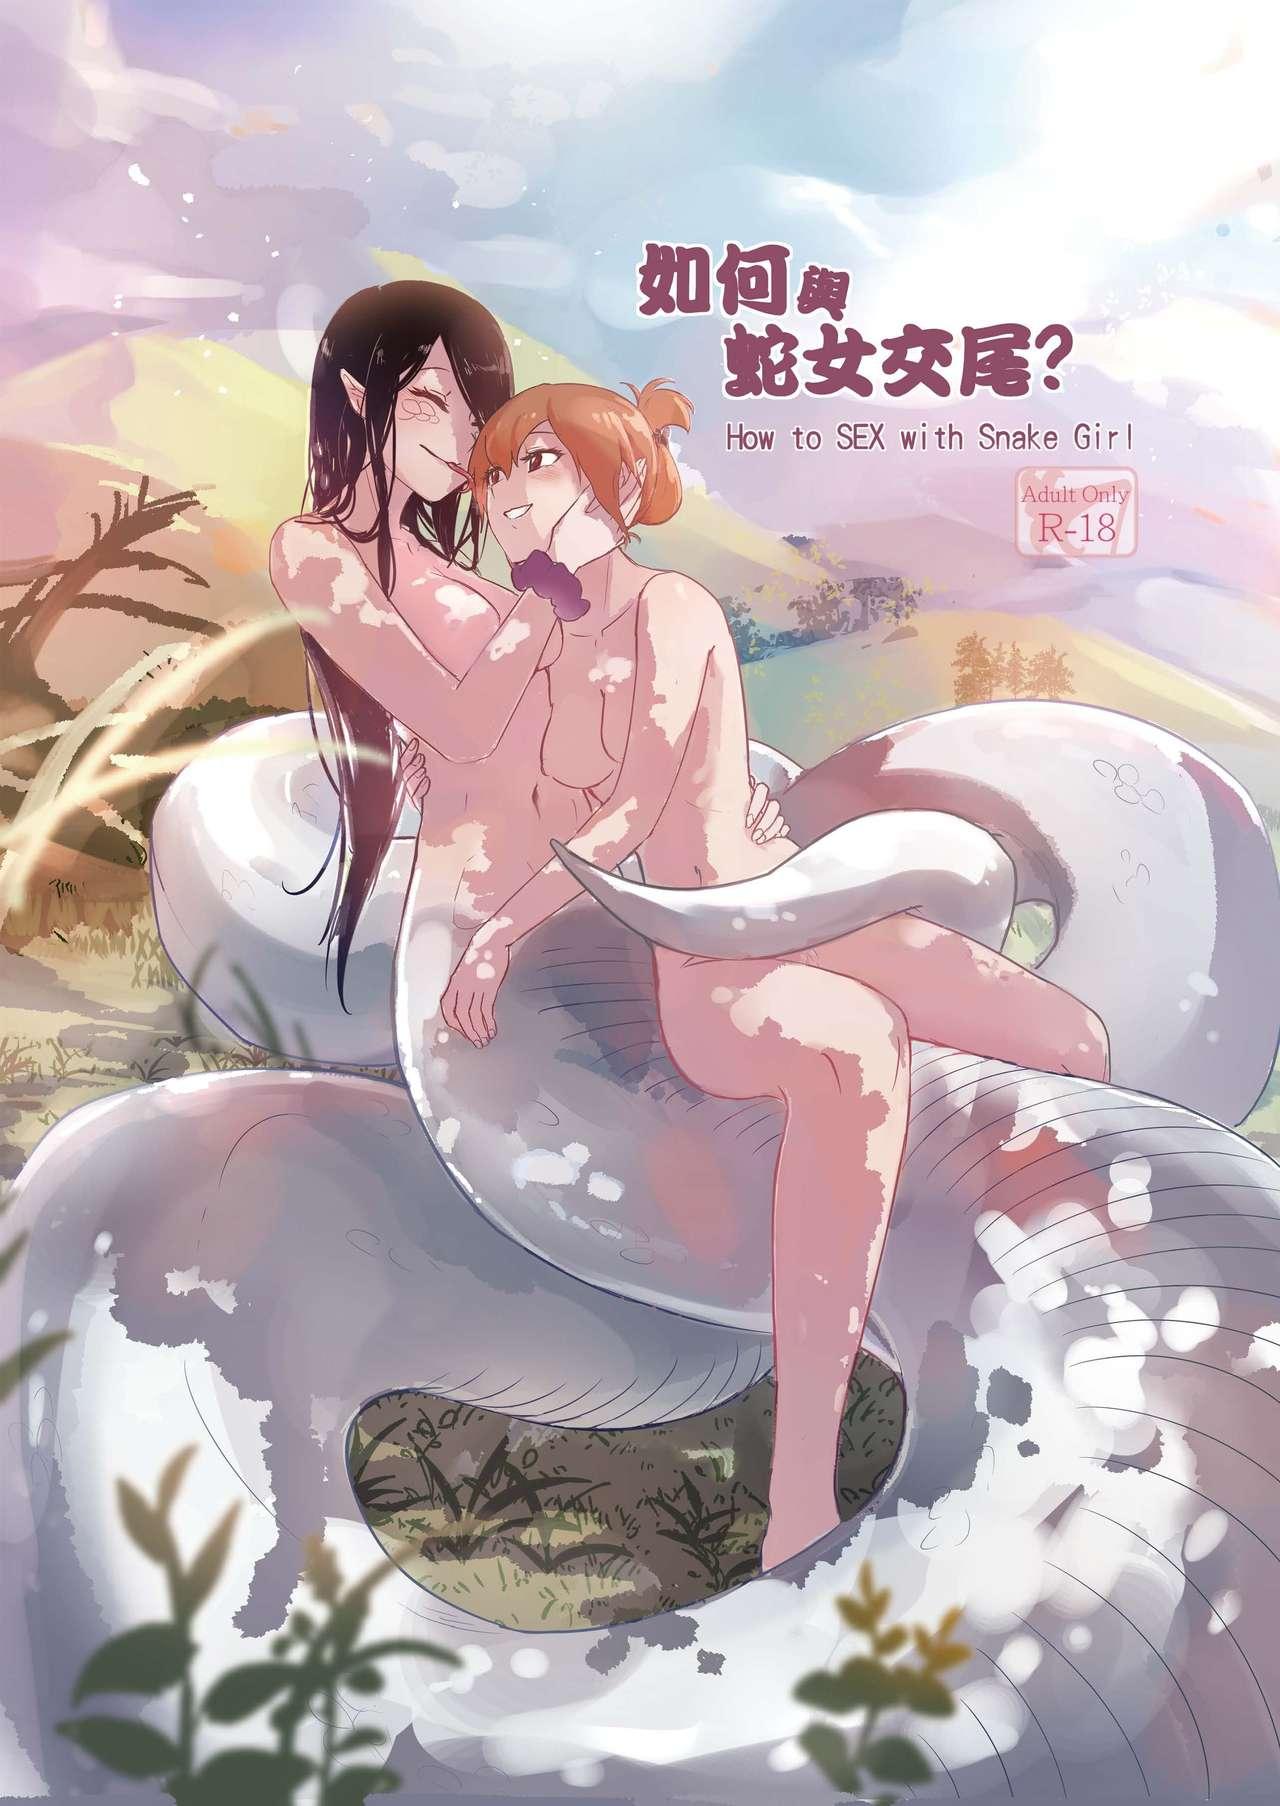 English How to Sex with Snake Girl | 如何與蛇女交尾 | 蛇女と交尾する方法は - Original Tetas - Picture 1